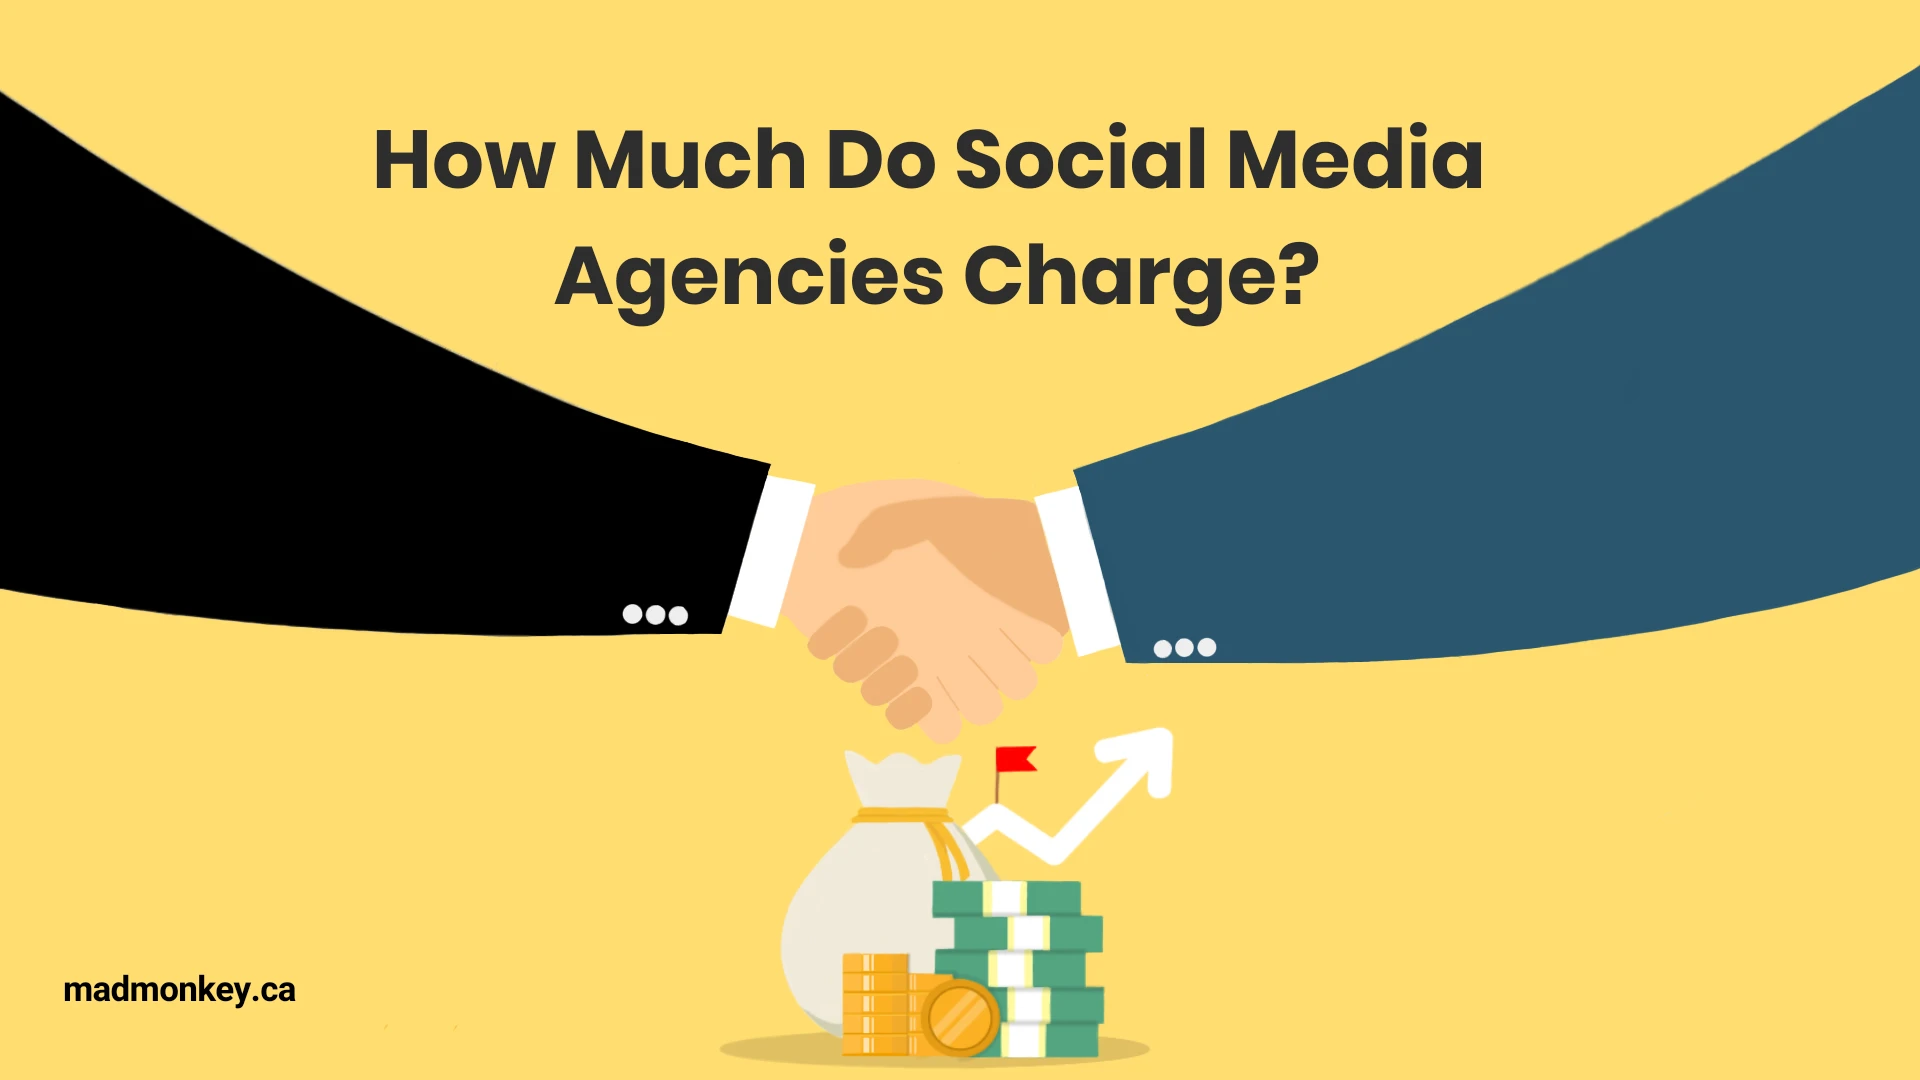 How Much Do Social Media Agencies Typically Charge? What is the average cost?